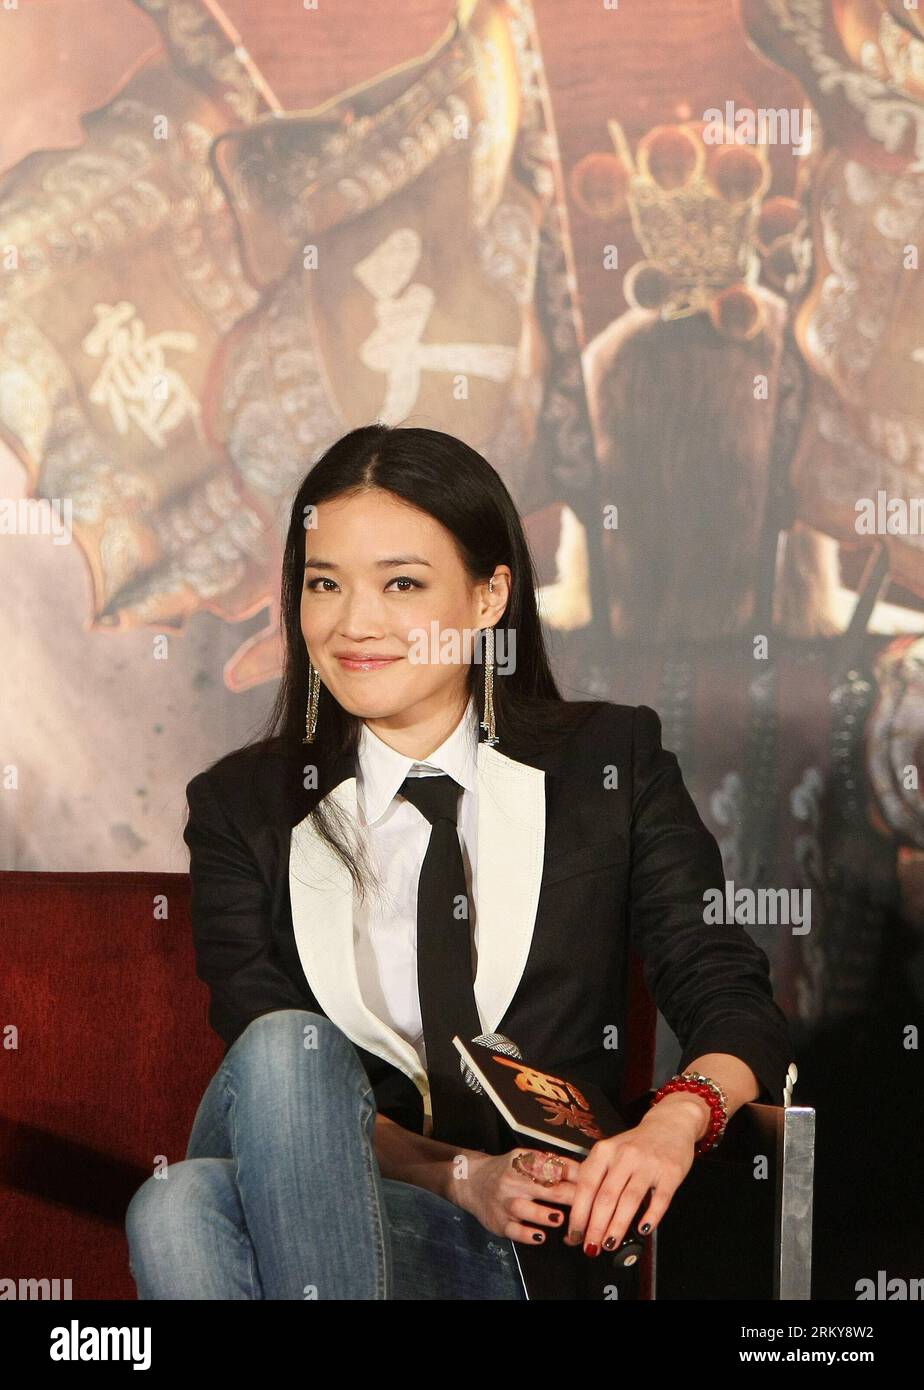 Bildnummer: 59167575  Datum: 03.02.2013  Copyright: imago/Xinhua (130203) -- BEIJING, Feb. 3, 2013 (Xinhua) -- Actress Hsu Chi attends the premiere of the movie Journey to the West: Conquering the Demons in Beijing, capital of China, Feb. 3, 2013. The movie is expected to hit the screen on Feb. 10, 2013 in Chinese mainland. (Xinhua/Li Fangyu) (mp) CHINA-BEIJING-MOVIE-PREMIERE (CN) PUBLICATIONxNOTxINxCHN People Entertainment Kultur Film Filmpremiere premiumd xbs x0x 2013 hoch      59167575 Date 03 02 2013 Copyright Imago XINHUA  Beijing Feb 3 2013 XINHUA actress Hsu Chi Attends The Premiere of Stock Photo